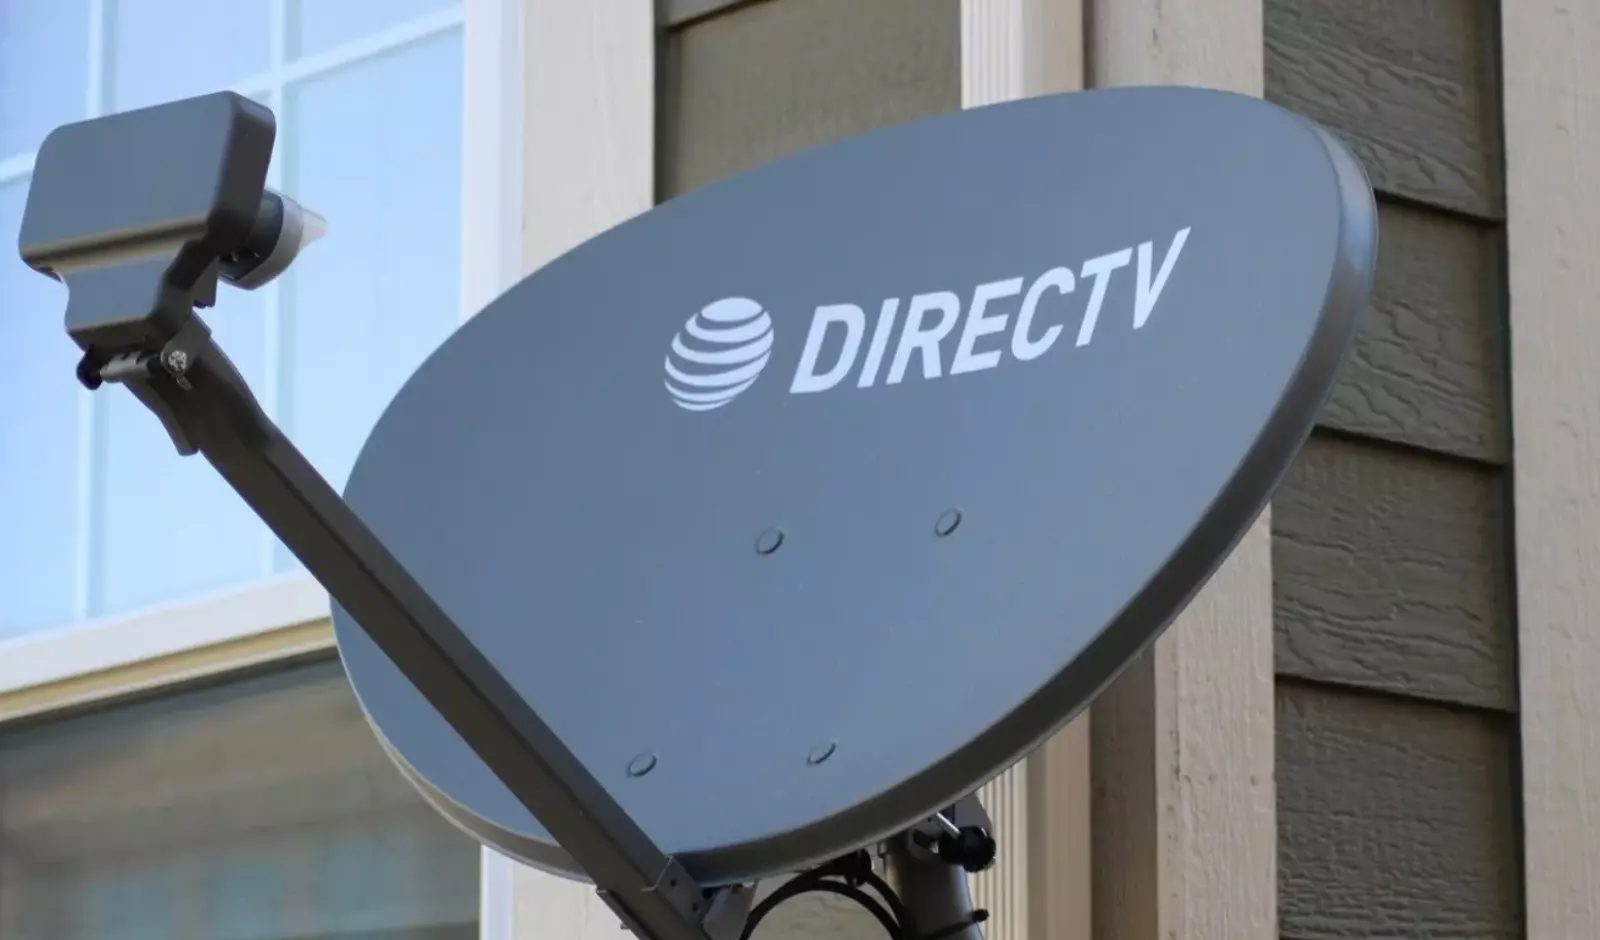 DirecTV Offers $10 Credit to Customers Affected by Cox Media Blackout